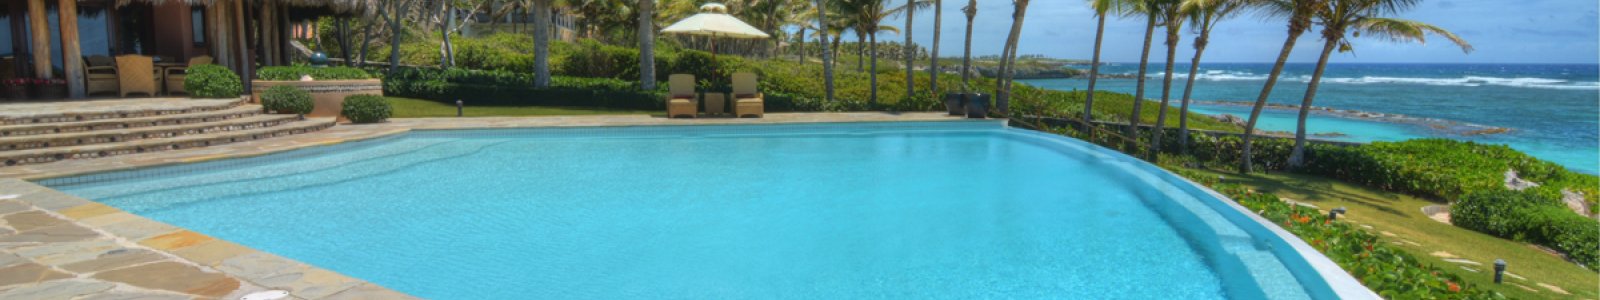 Dominican Rep. Homes for Rent | Private Luxury Homes & Condos